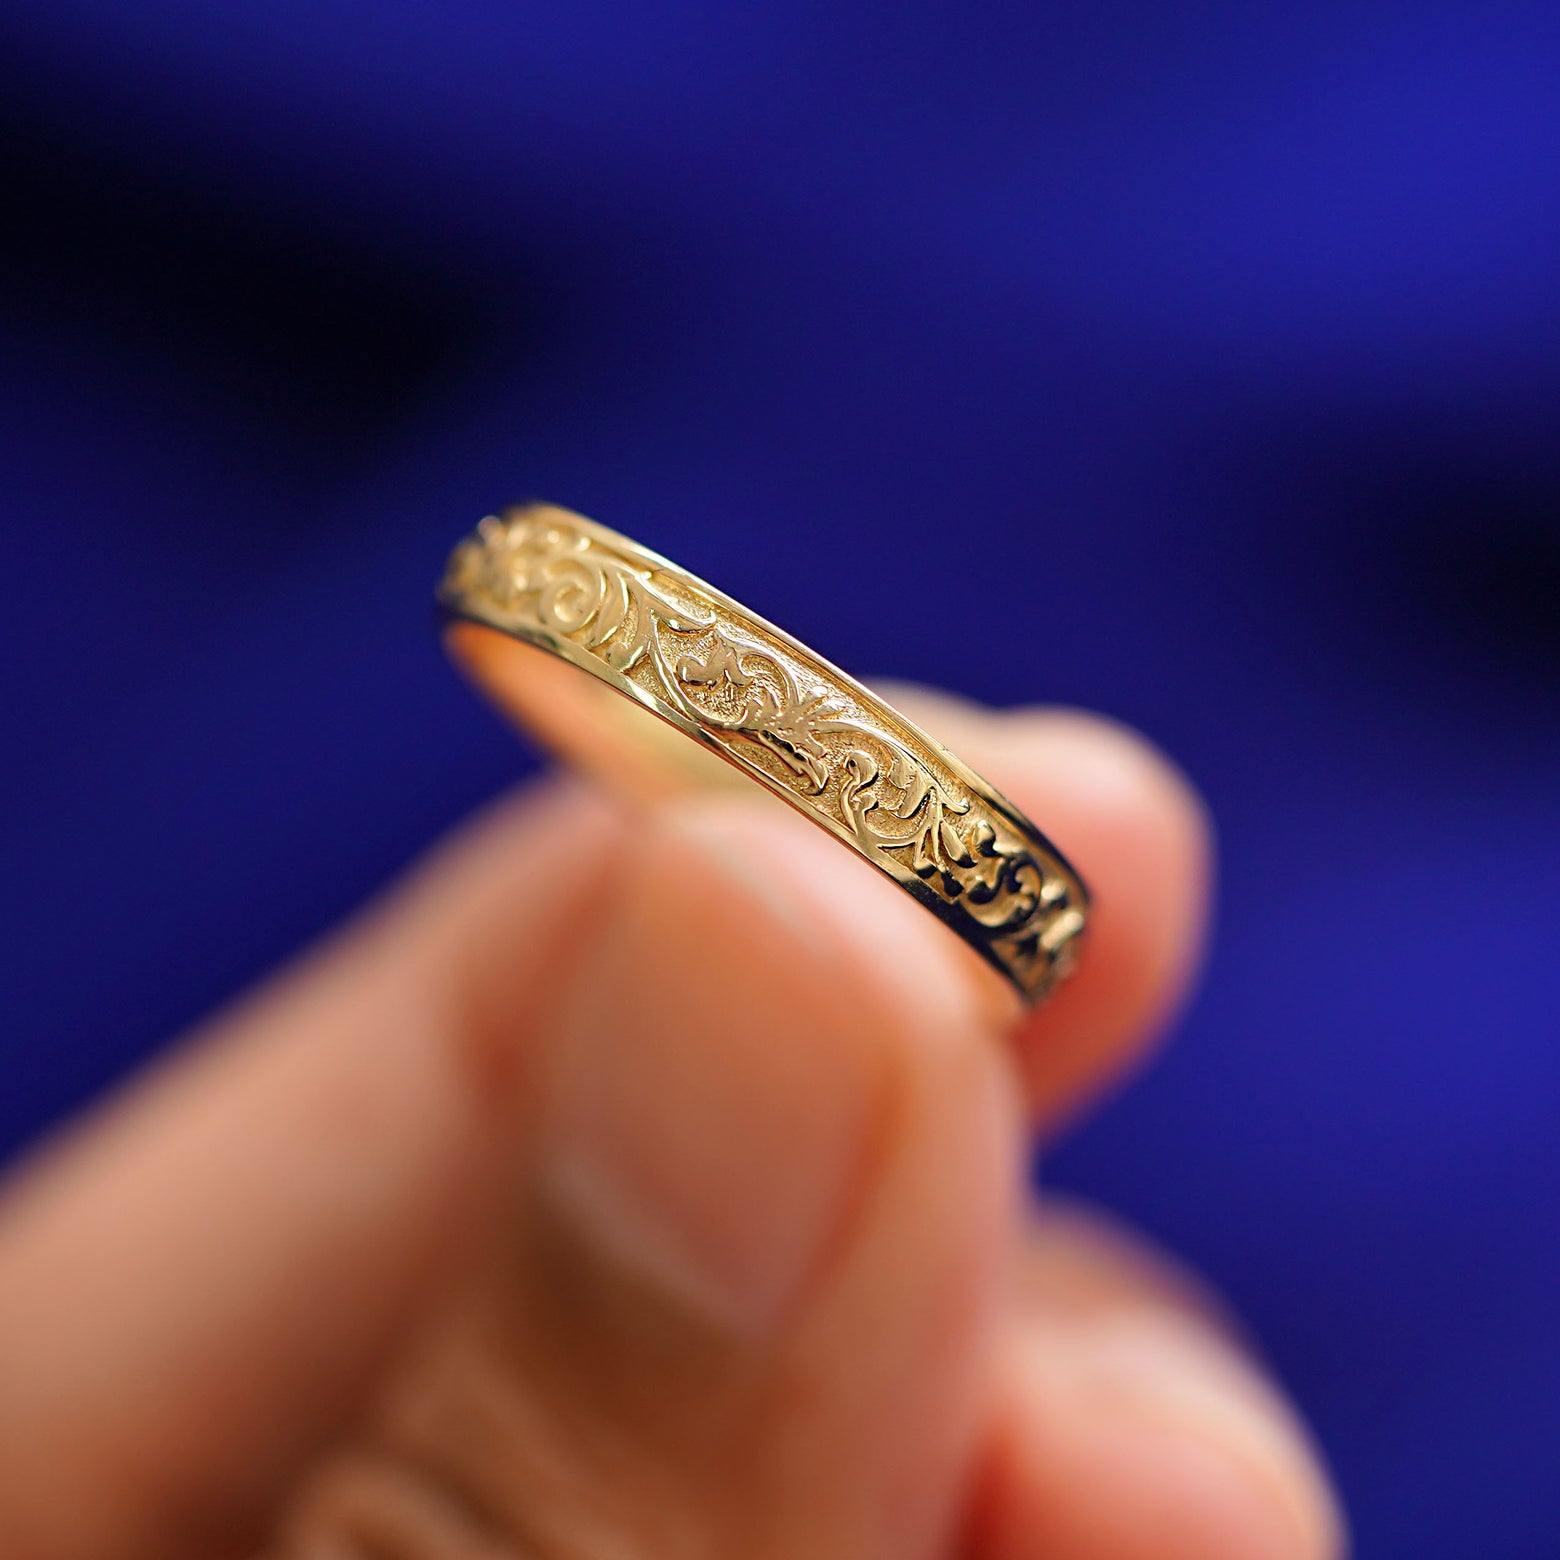 A model holding a 14k gold Filigree Band between their finger tips to show filigree detailing